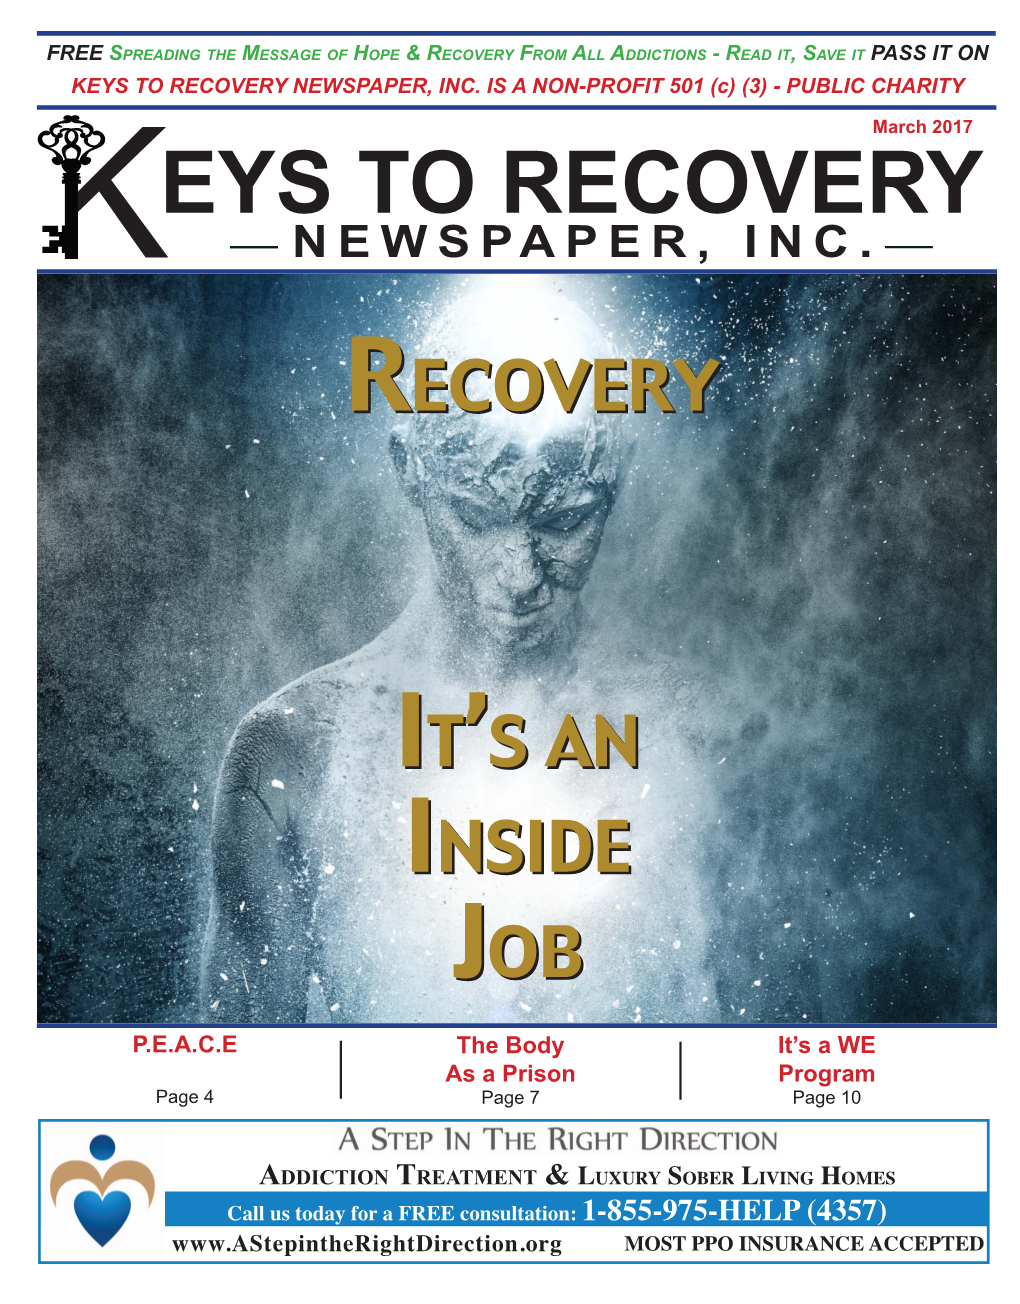 Eys to Recovery Newspaper, Inc